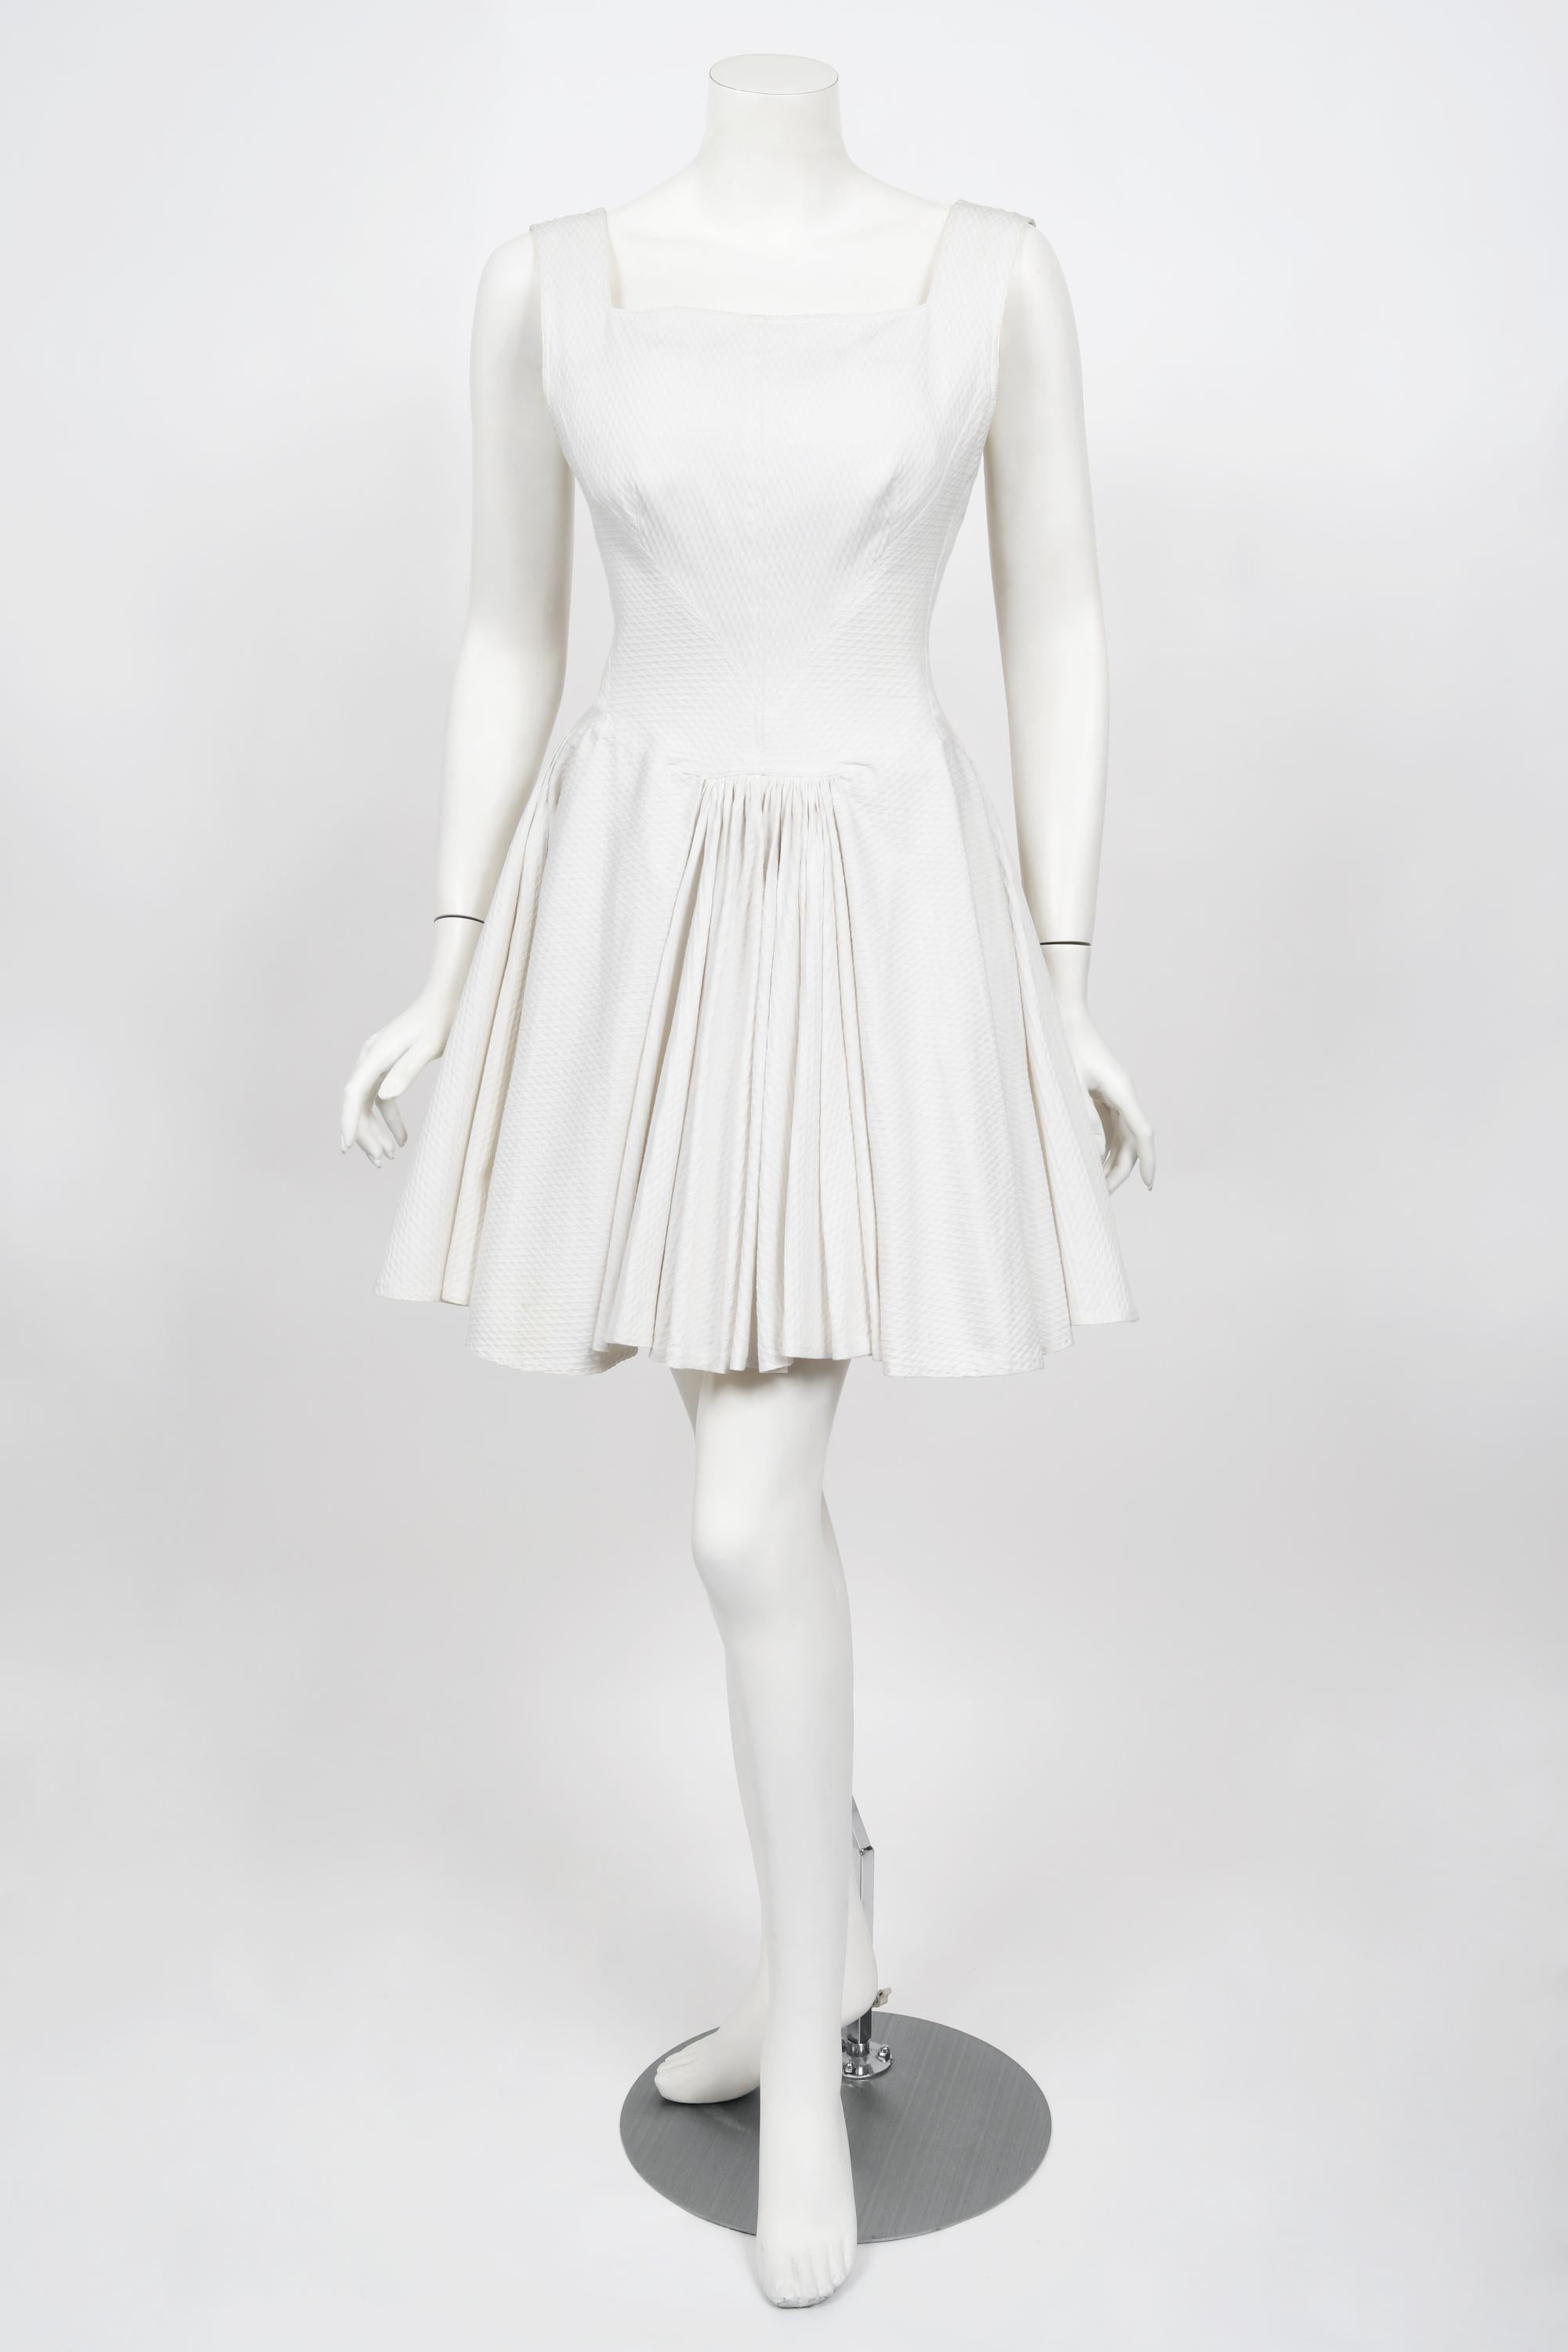 Incredibly chic ivory white waffle-cotton skater mini dress from Azzedine Alaia's 1990 spring/summer collection. This dress is so iconic and would be a wonderful beach resort or bridal look! Alaïa introduced the world to the 'body' and to his own